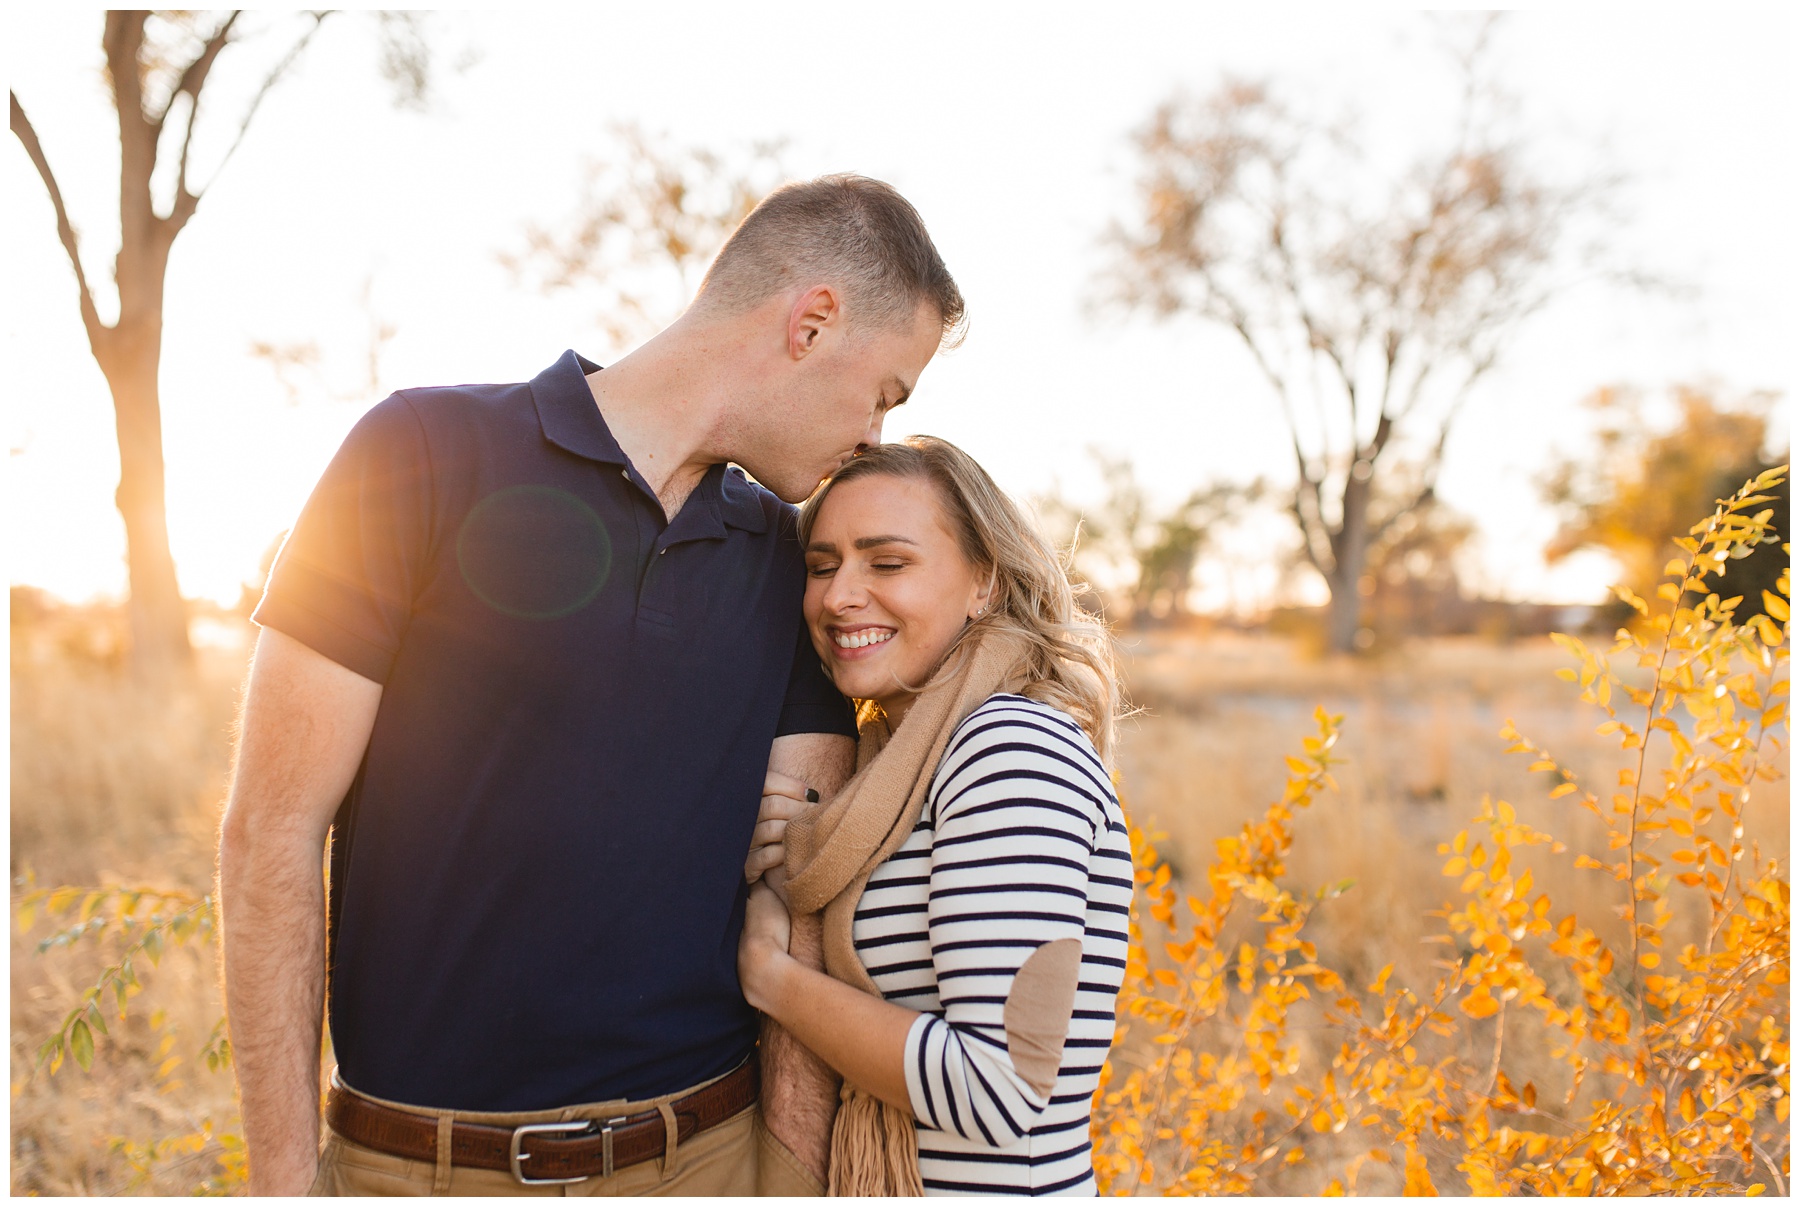 Natural light photographer in Boise Idaho, couple kissing forehead in the sunset